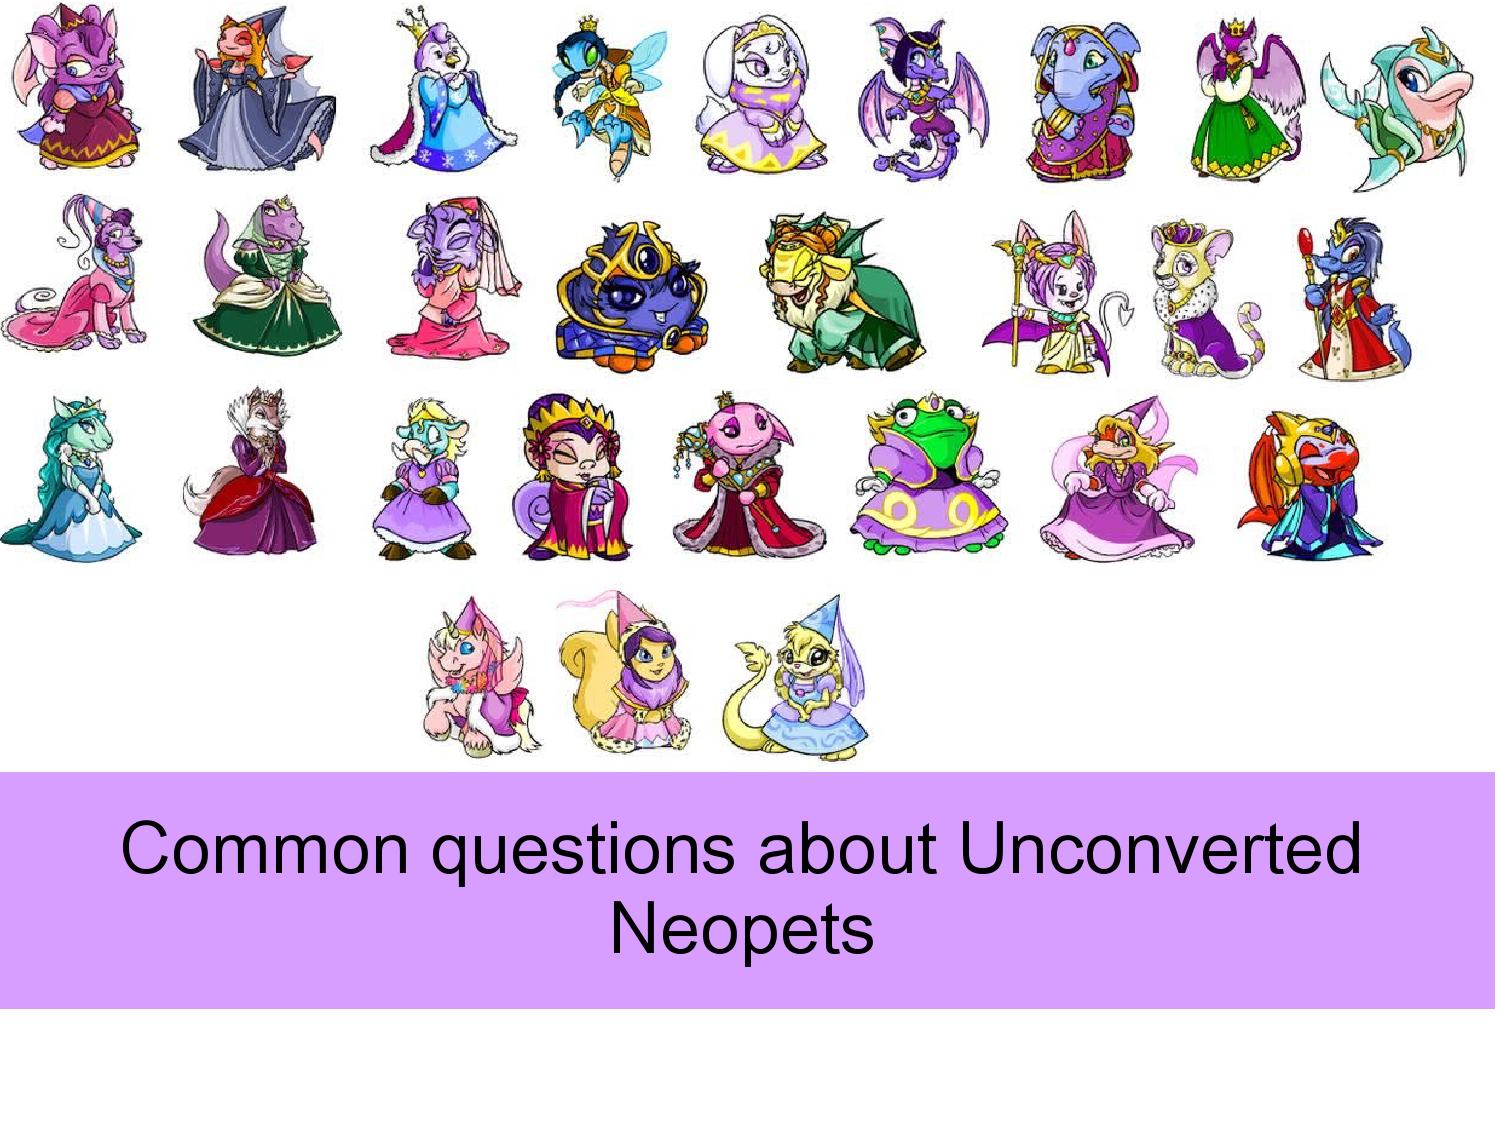 Neopets’ original pet art, called UCs, is coming back - Polygon